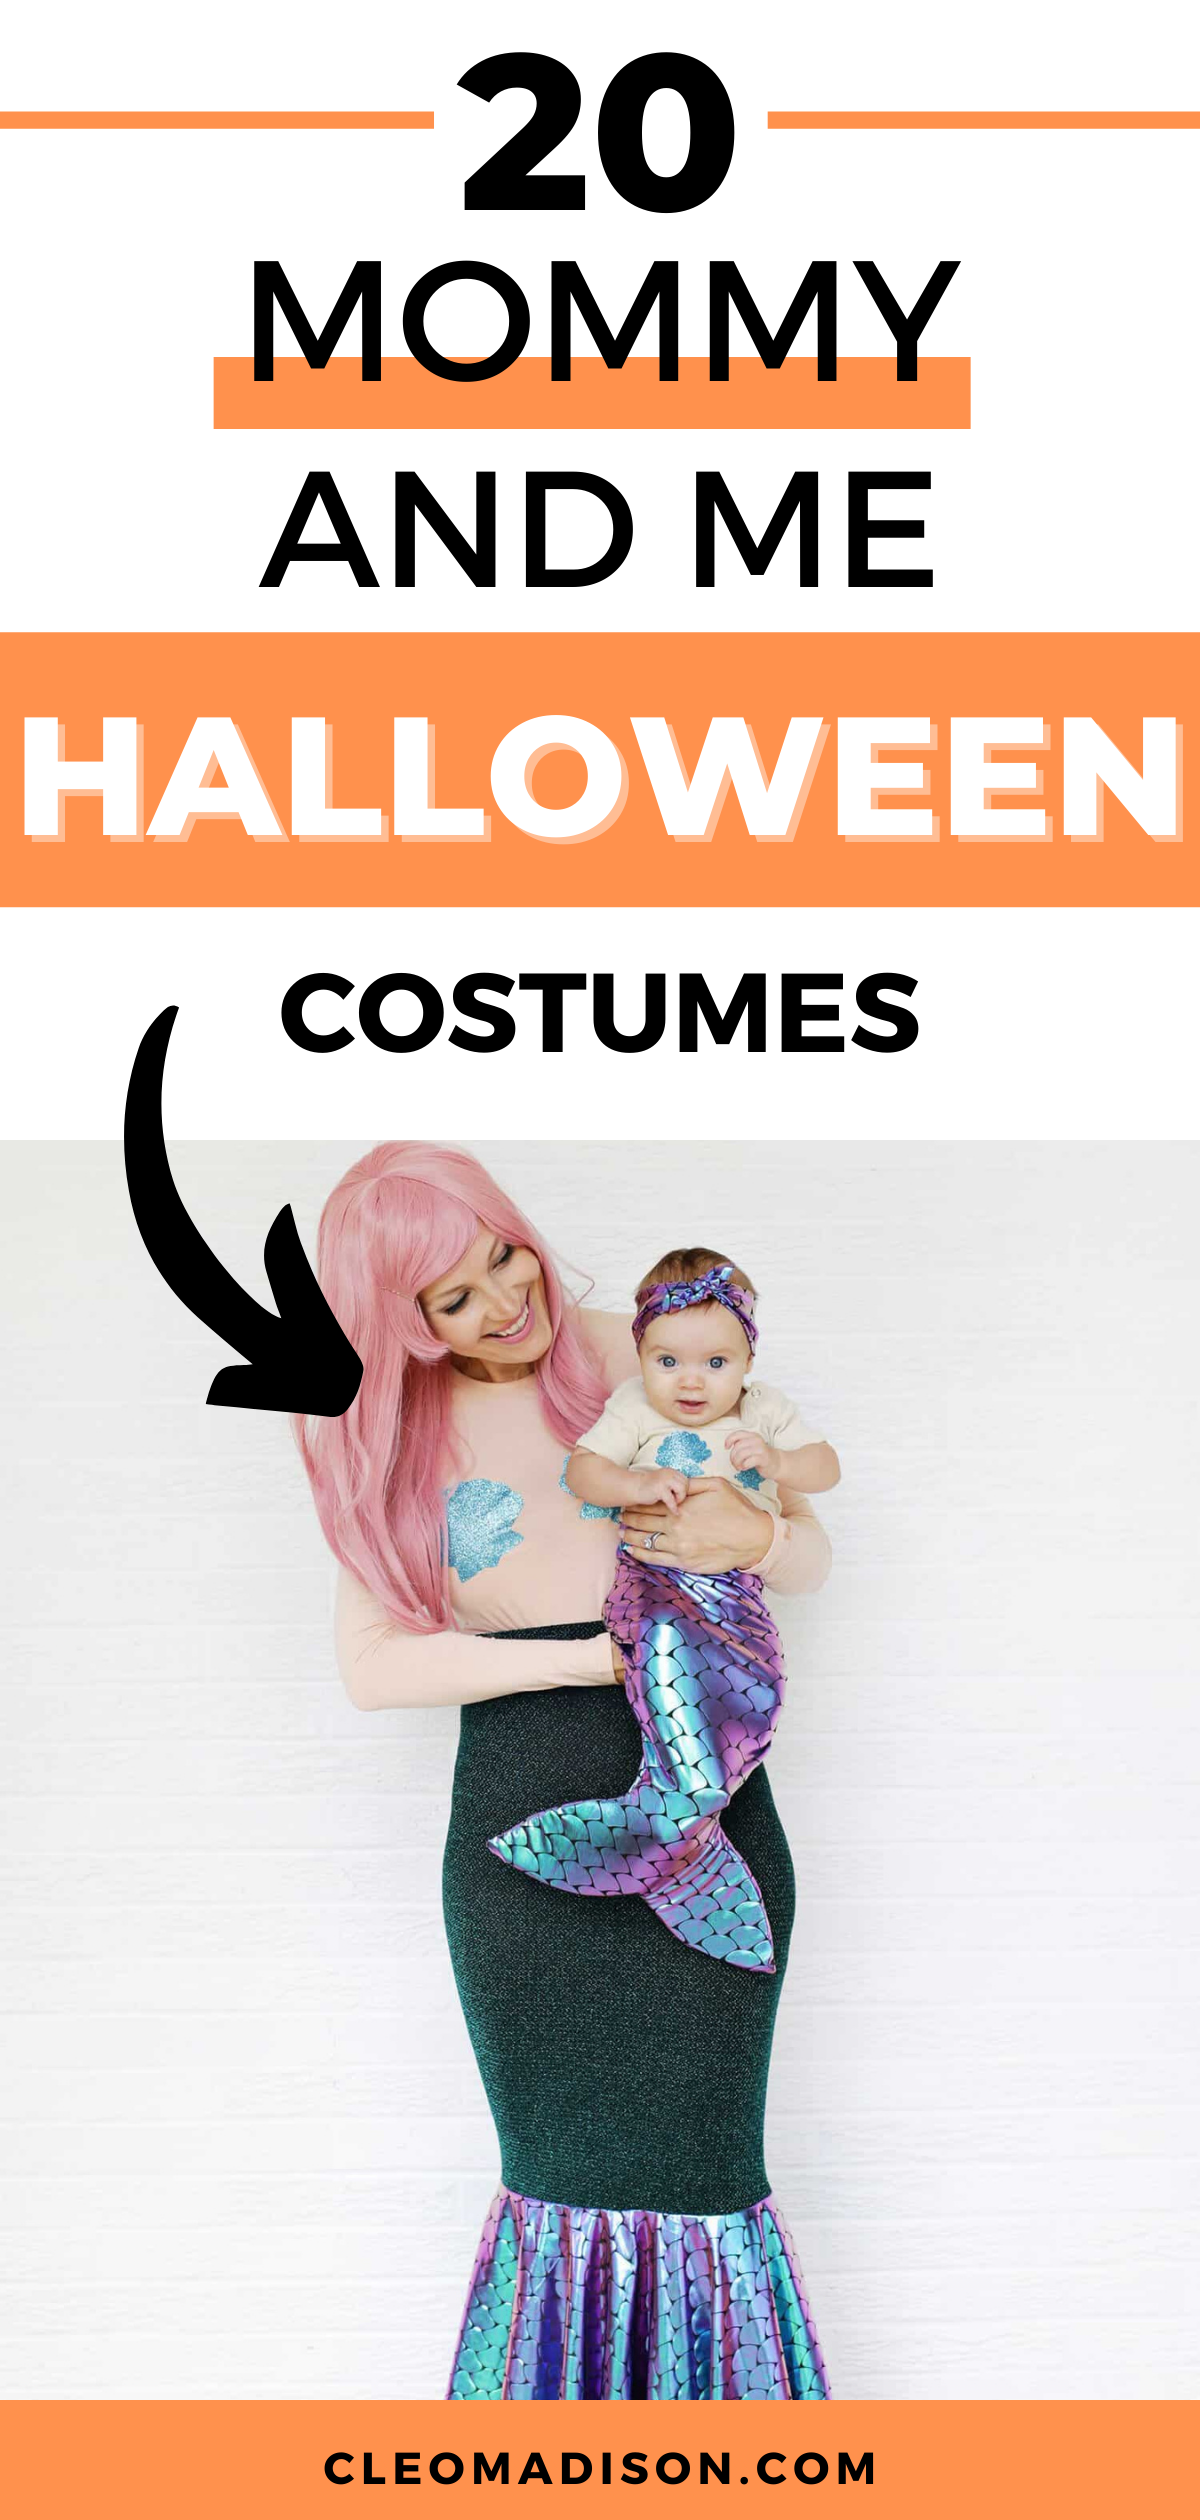 mommy and me costumes